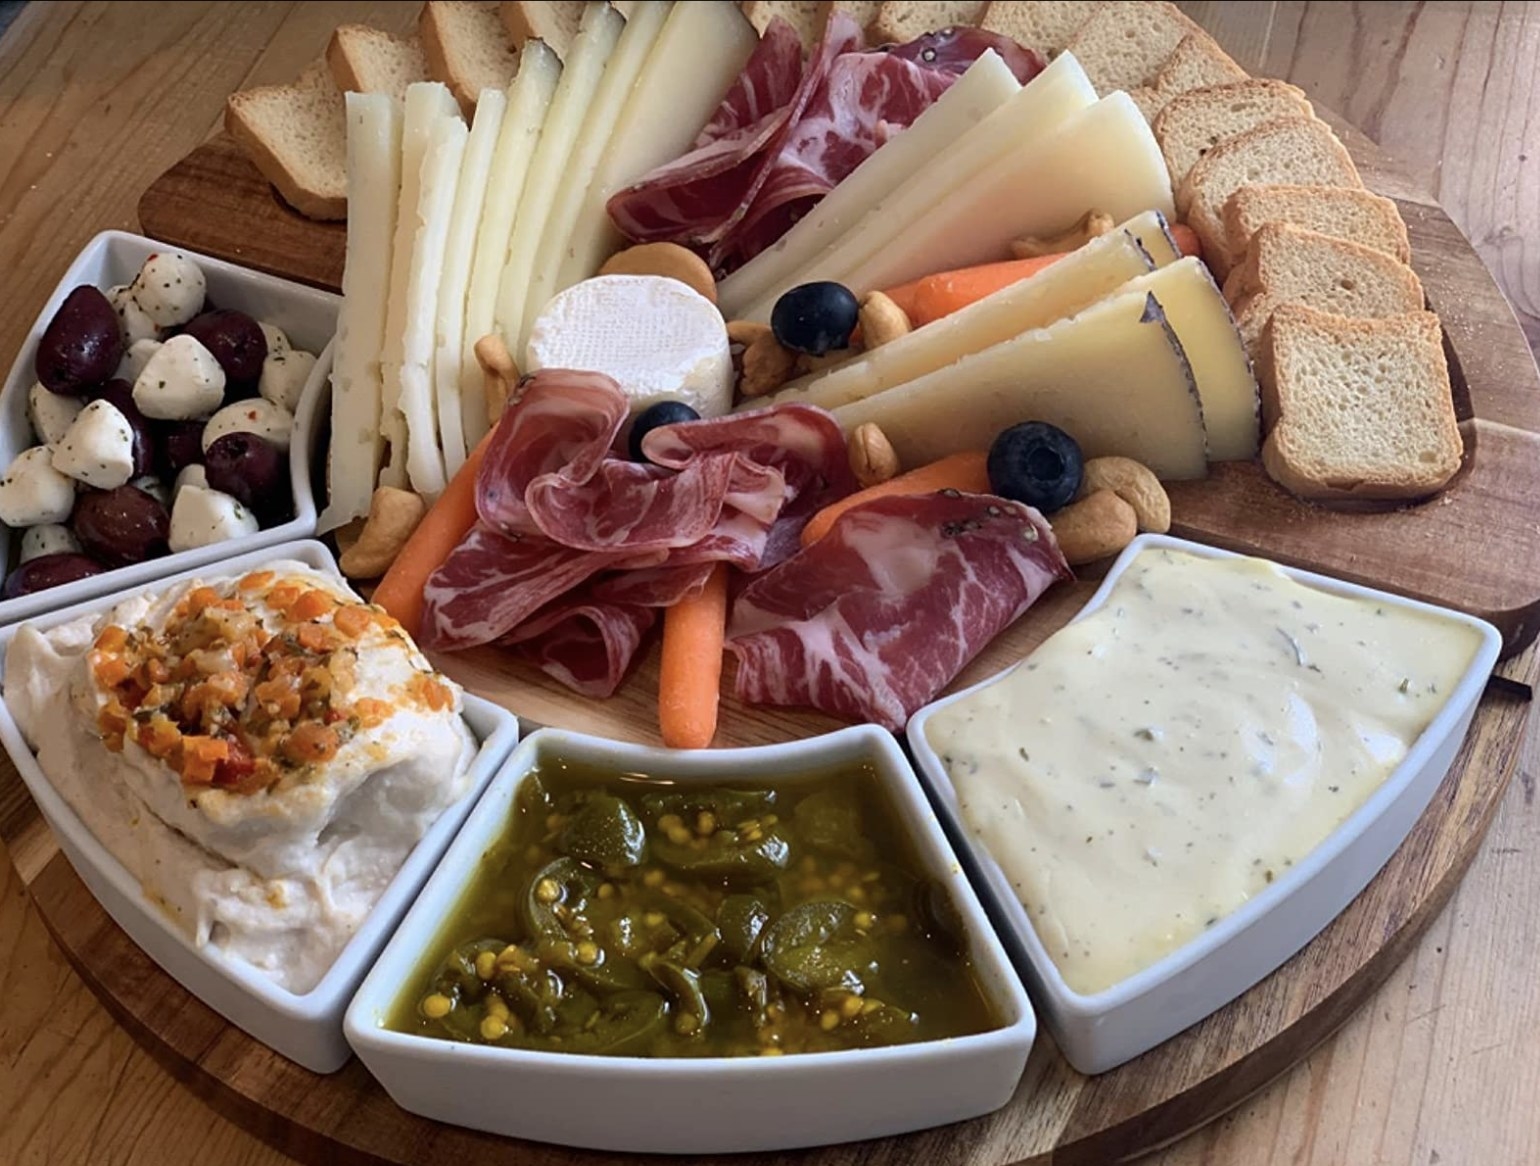 reviewer photo showing the cheese board set filled with cheese, crackers, meat, veggies and dips